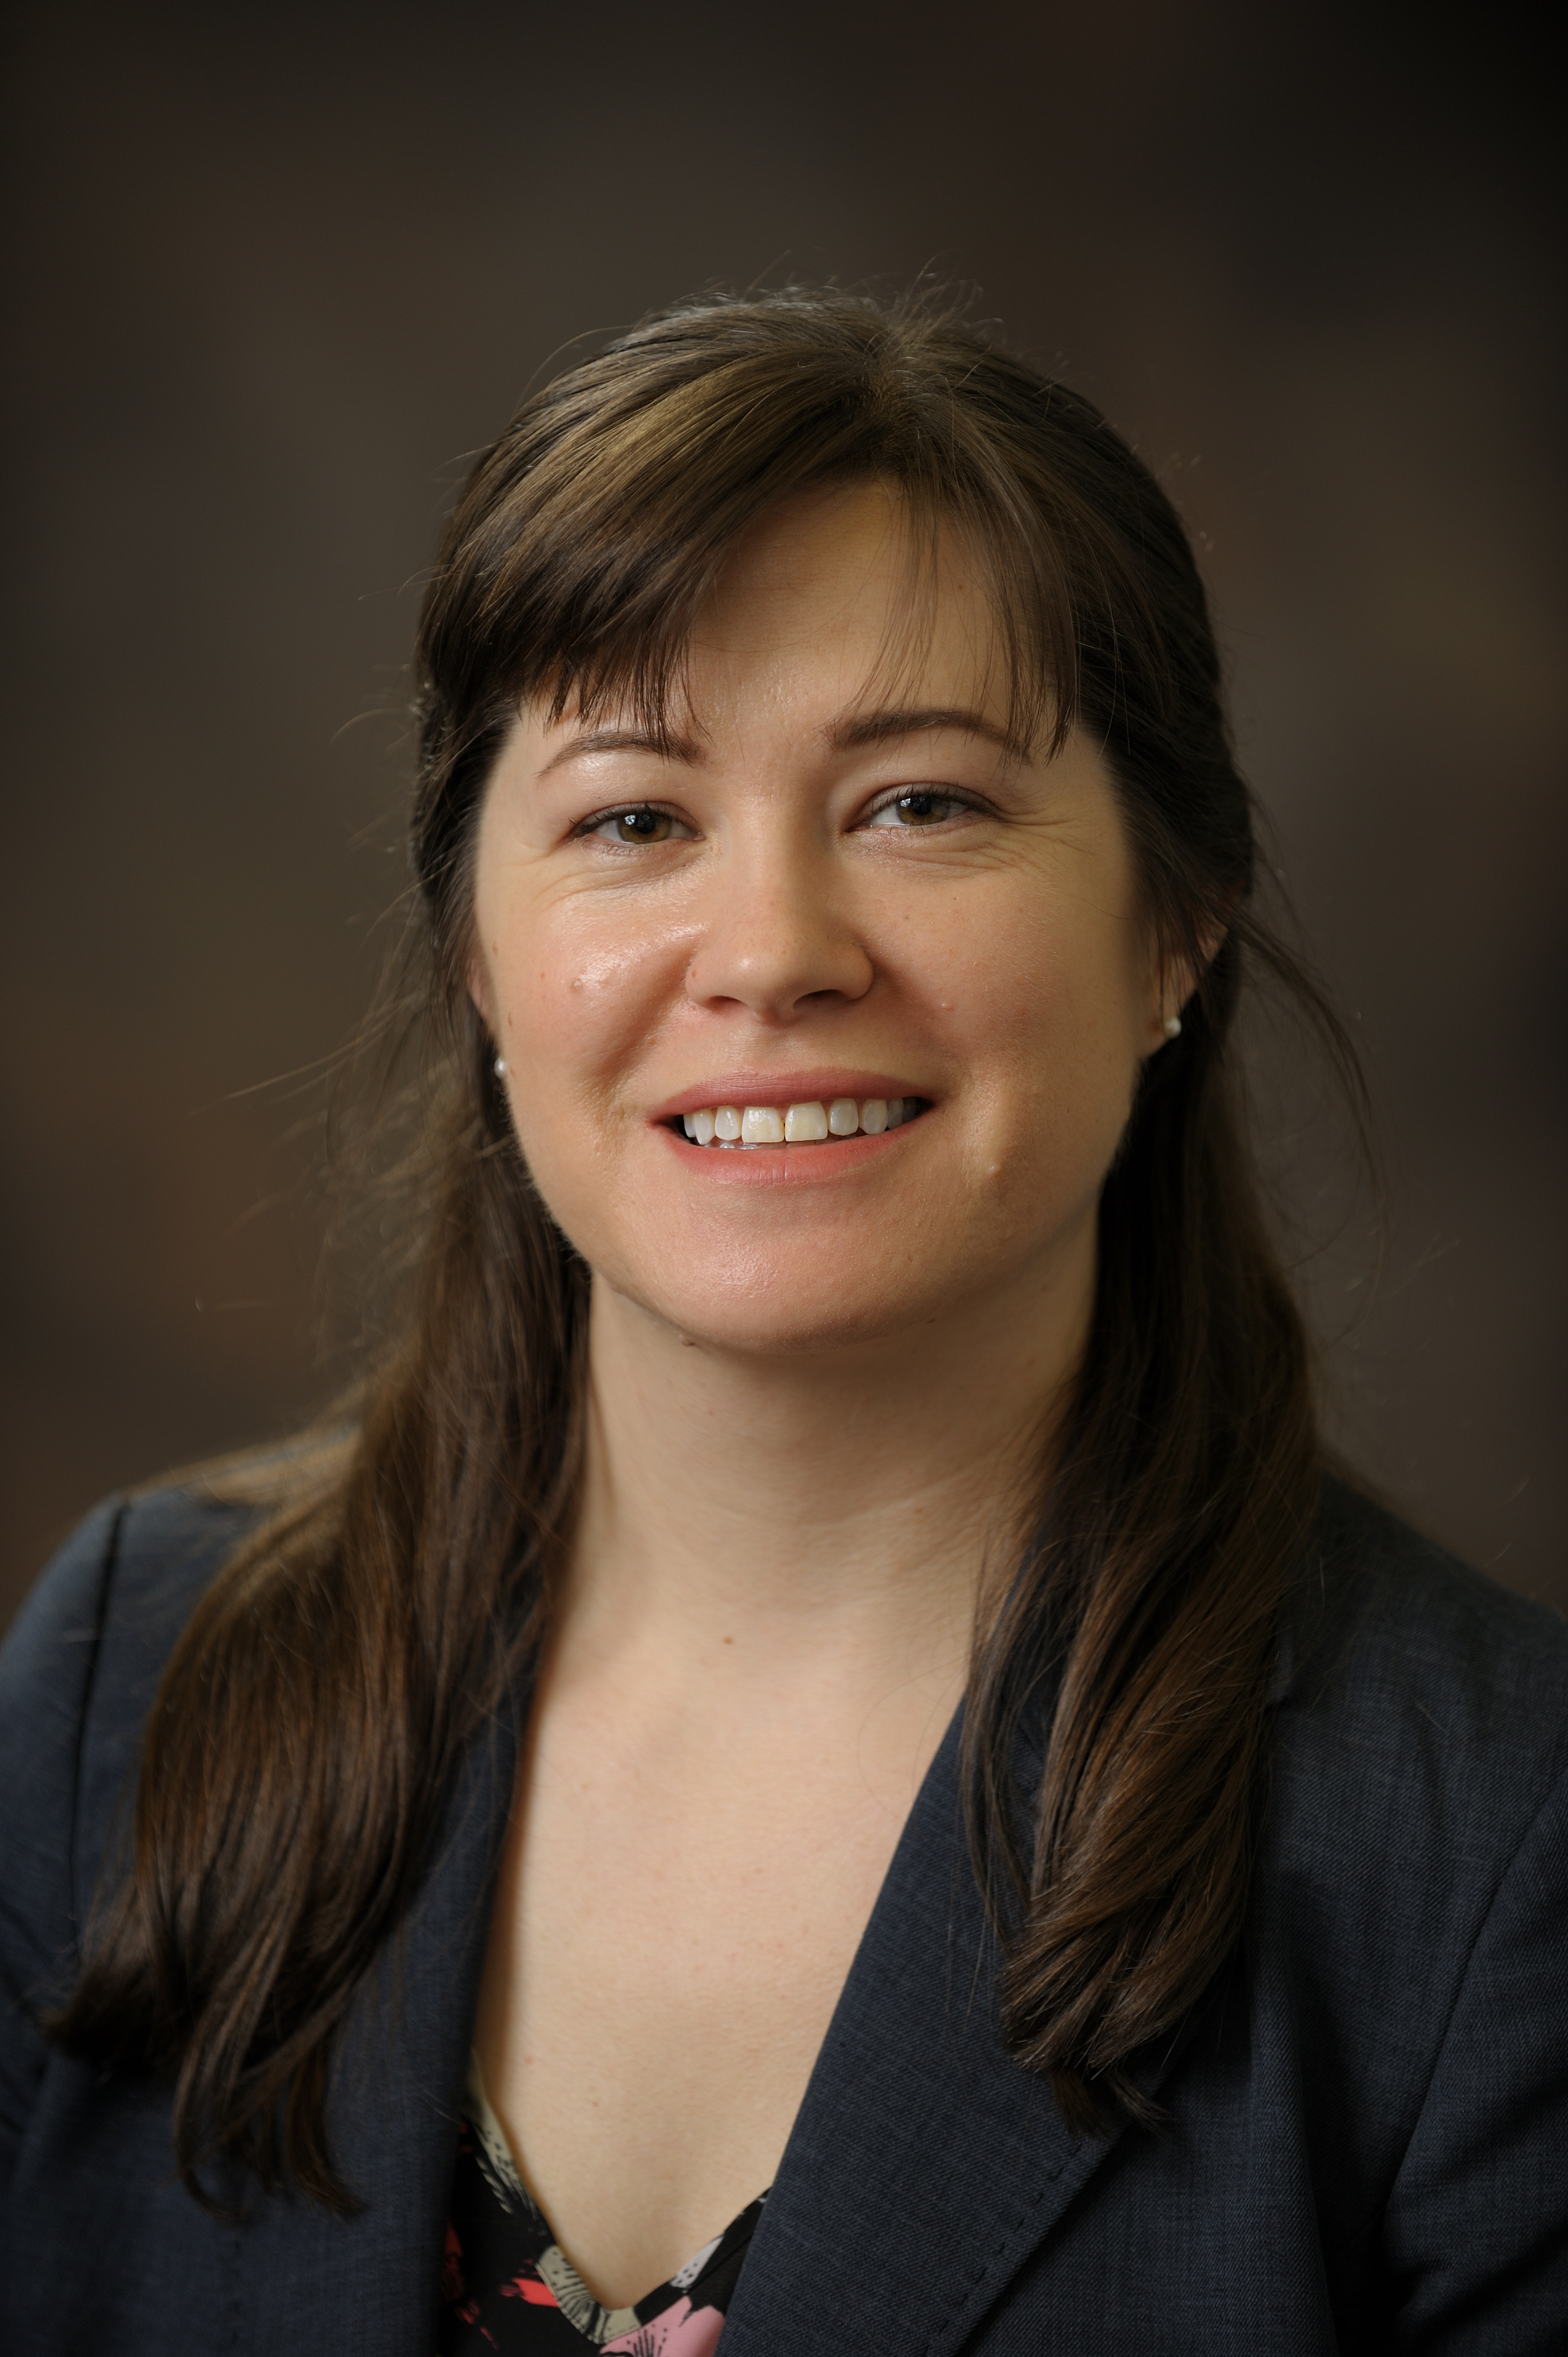 Dr. Alison Dunn earned her B.S., M.S. and Ph.D. degrees in mechanical engineering from UF. She is now an assistant professor at the the University of Illinois at Urbana-Champaign.